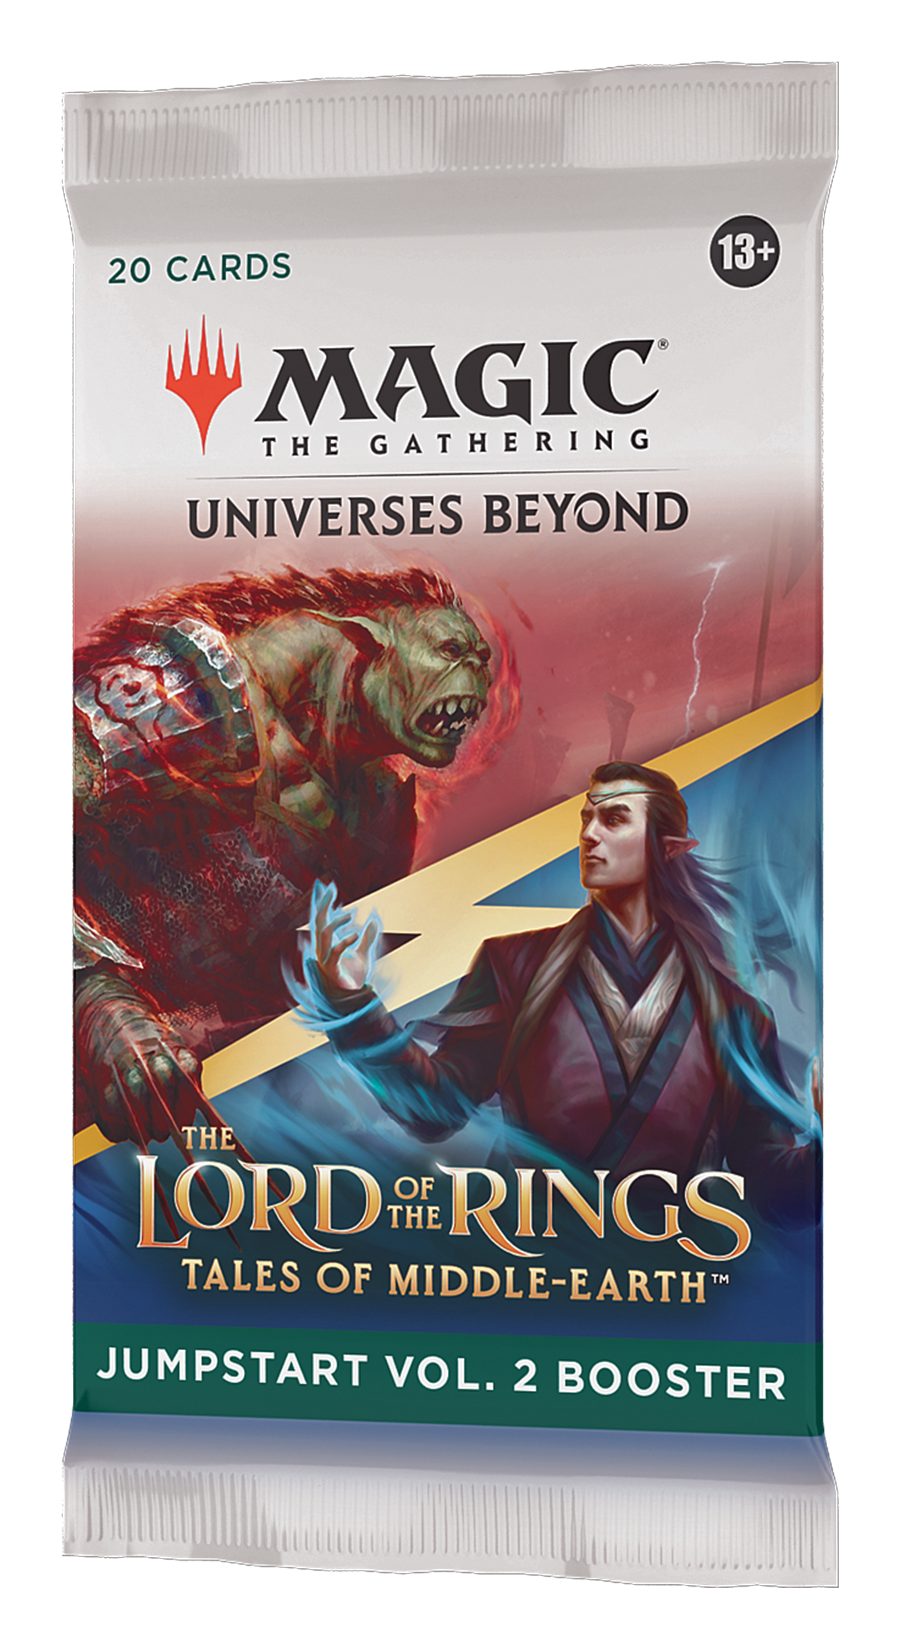 The Lord of the Rings: Tales of Middle-earth™ Jumpstart Vol. 2 Booster